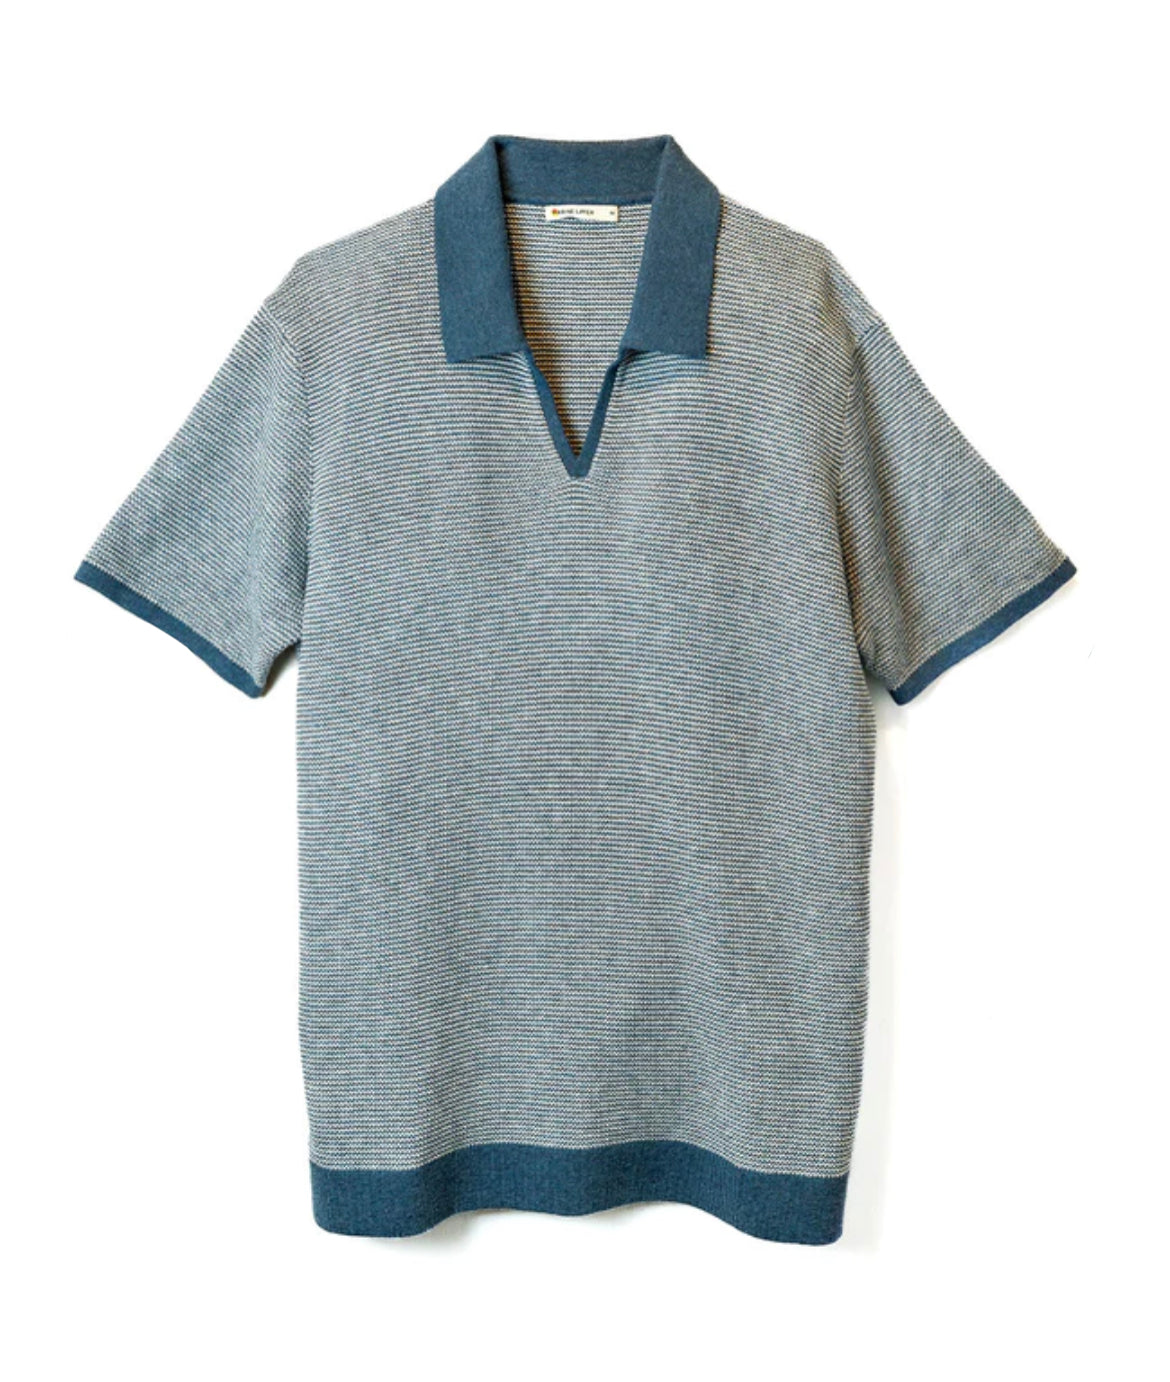 Marine Layer - MARINE LAYER LIAM SWEATER POLO IN NAVY - Rent With Thred